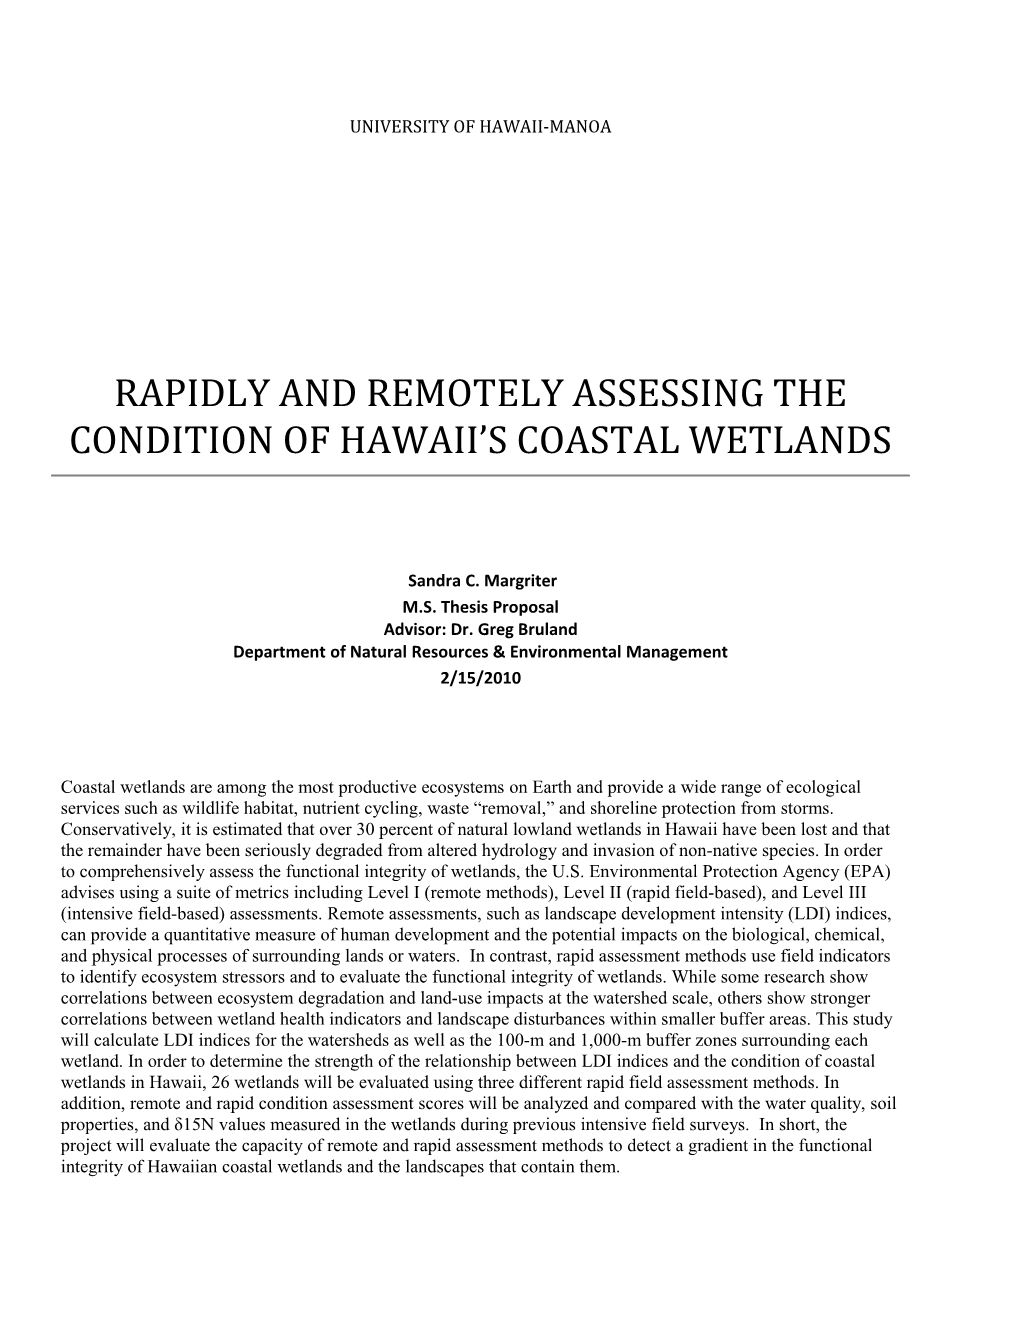 Rapidly and Remotely Assessing the Condition of Hawaii S Coastal Wetlands